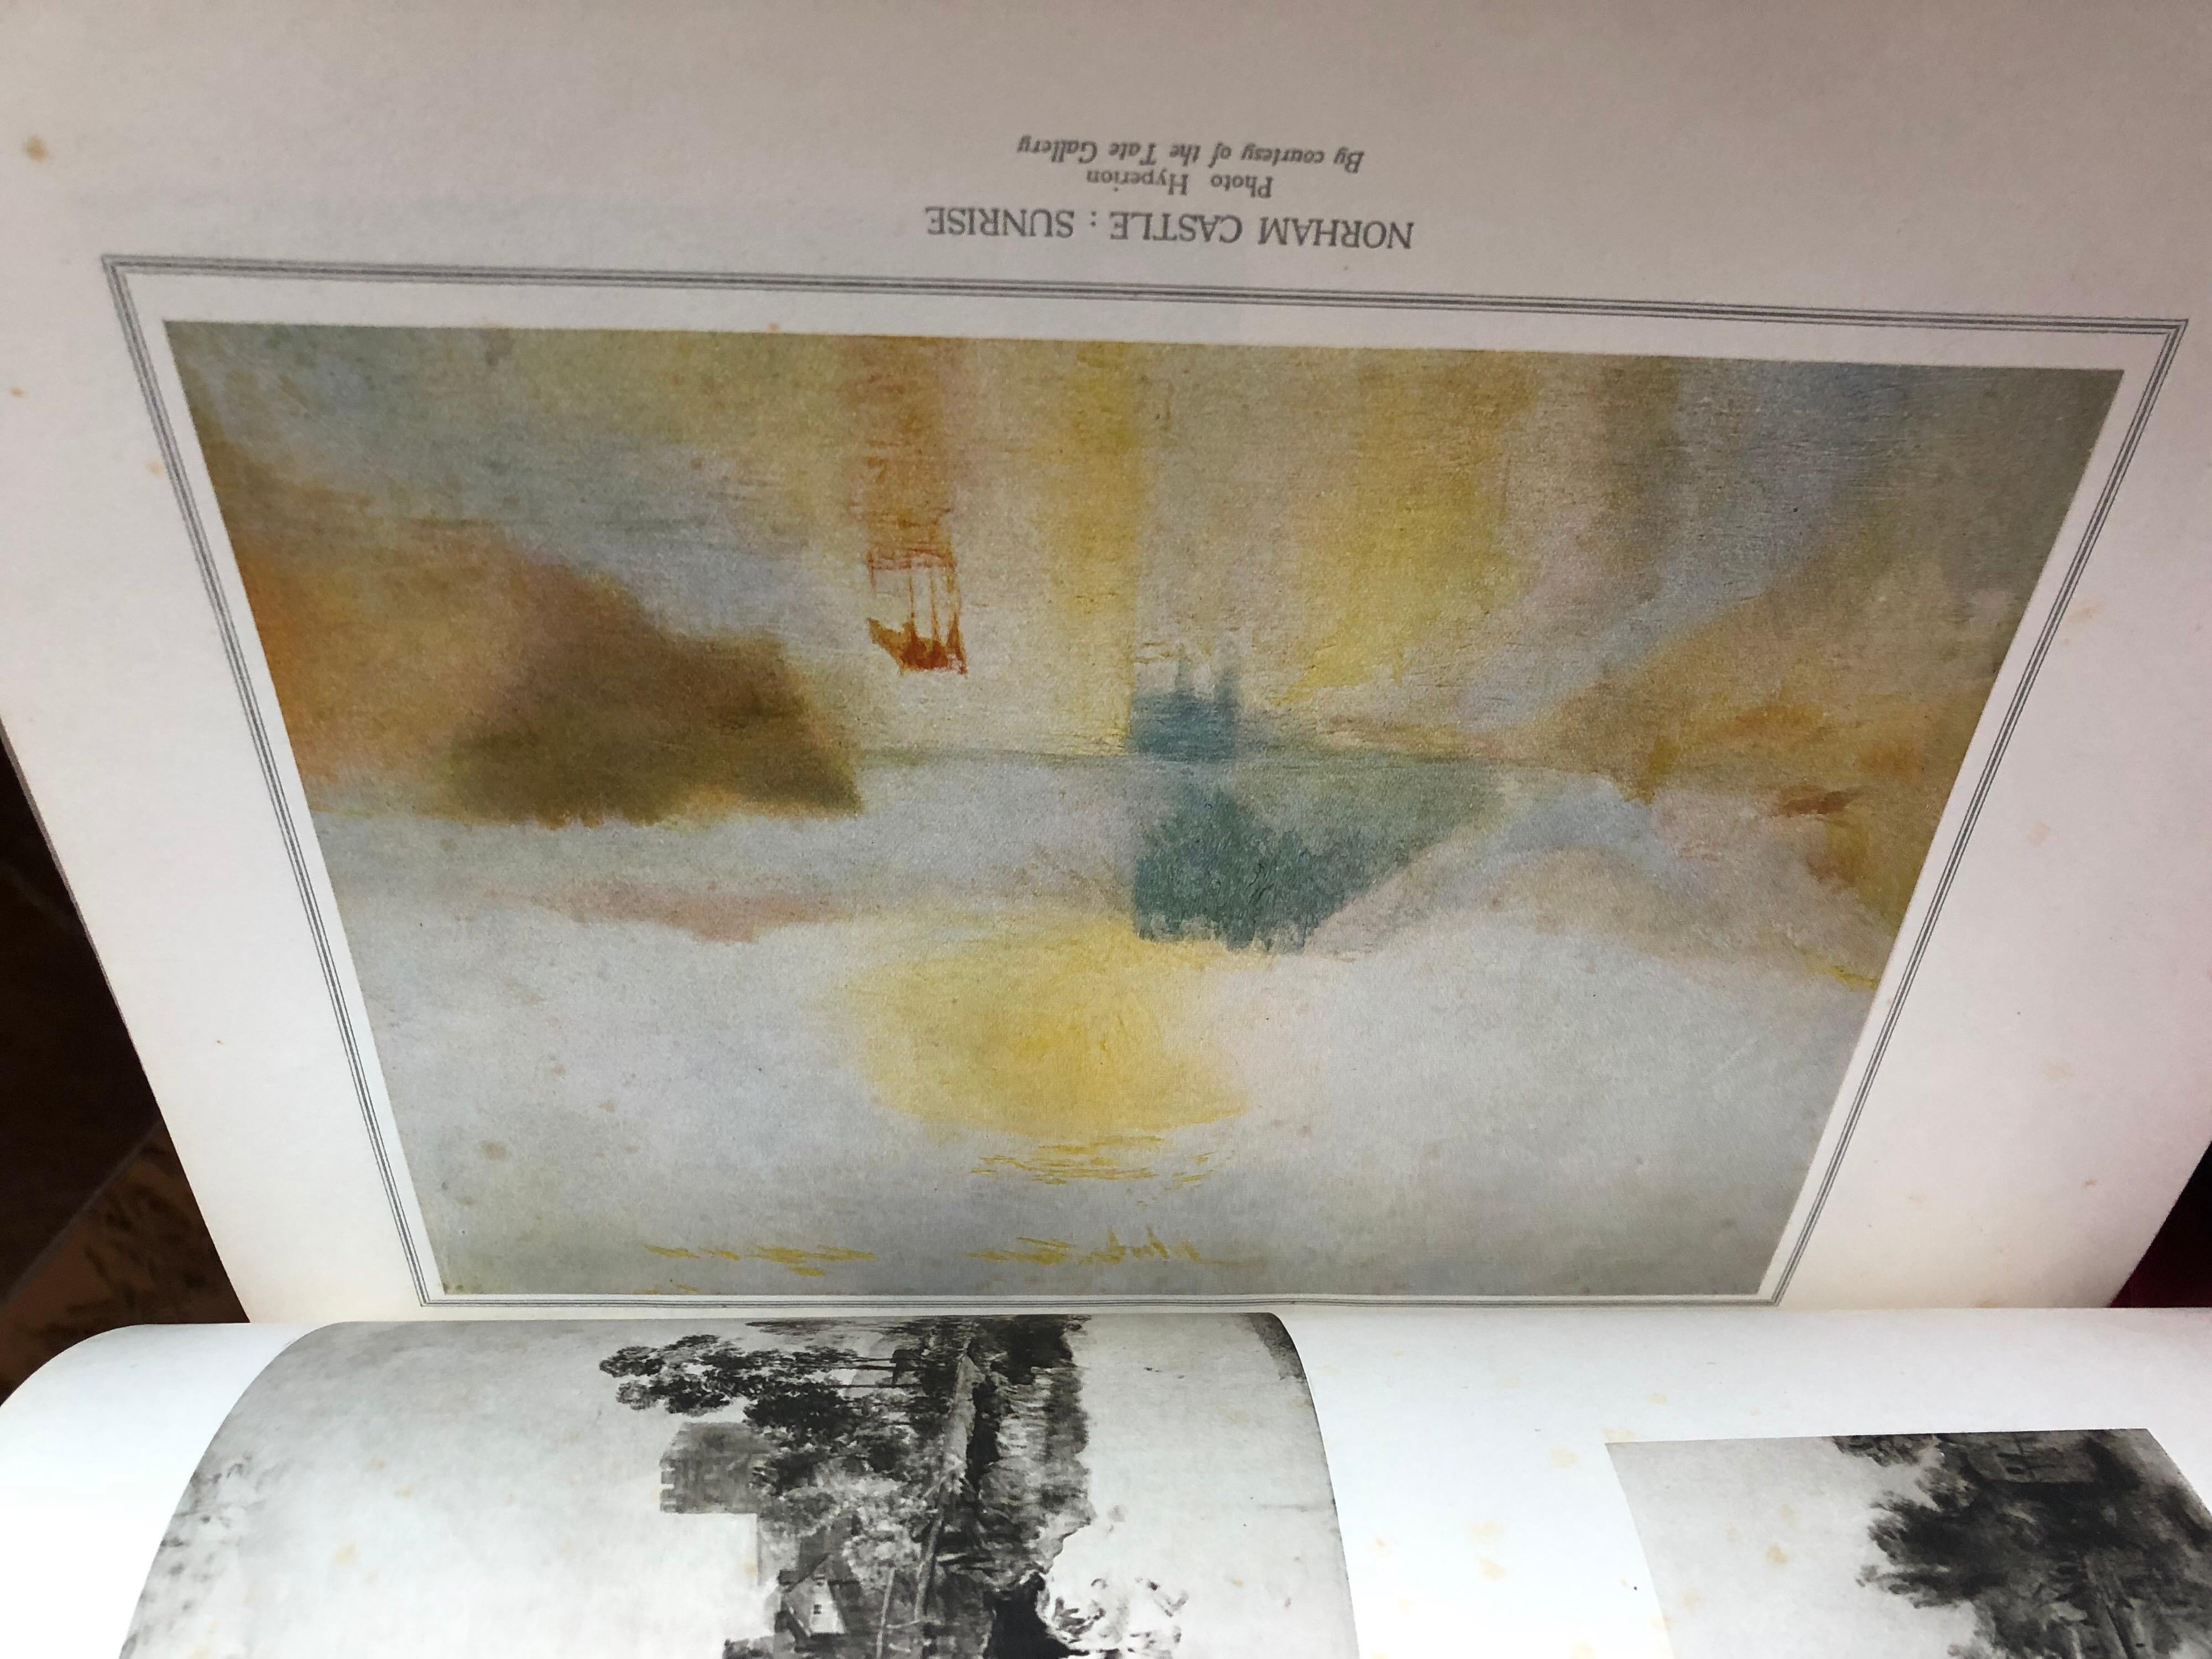 Turner by Camille Mauclair, Color Plates Printed, Photogravure, Paris, 1939 SALE 5